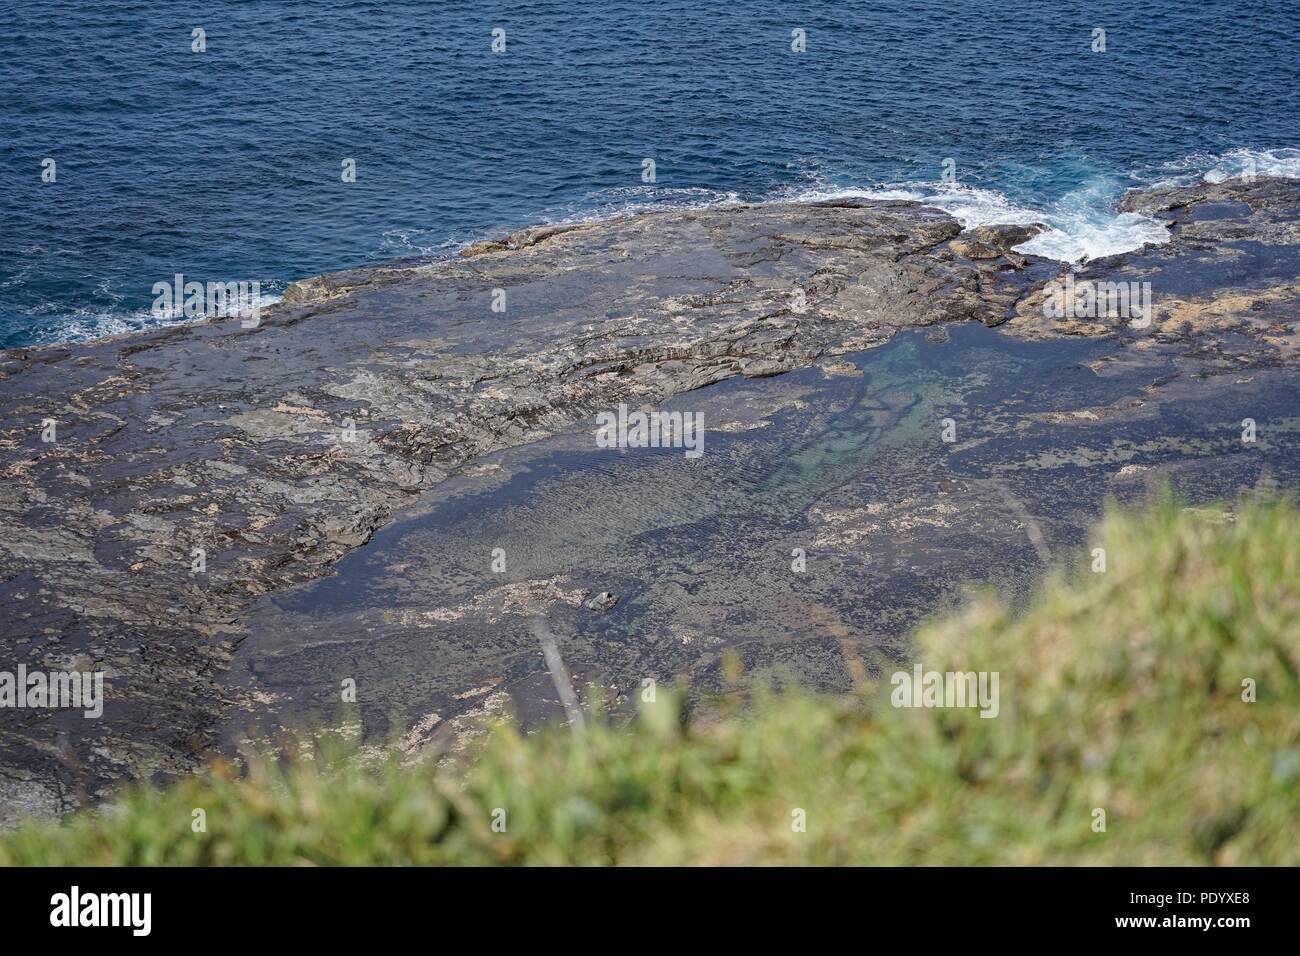 Rock shelf on the coast of Australia. View from a cliff. Stock Photo